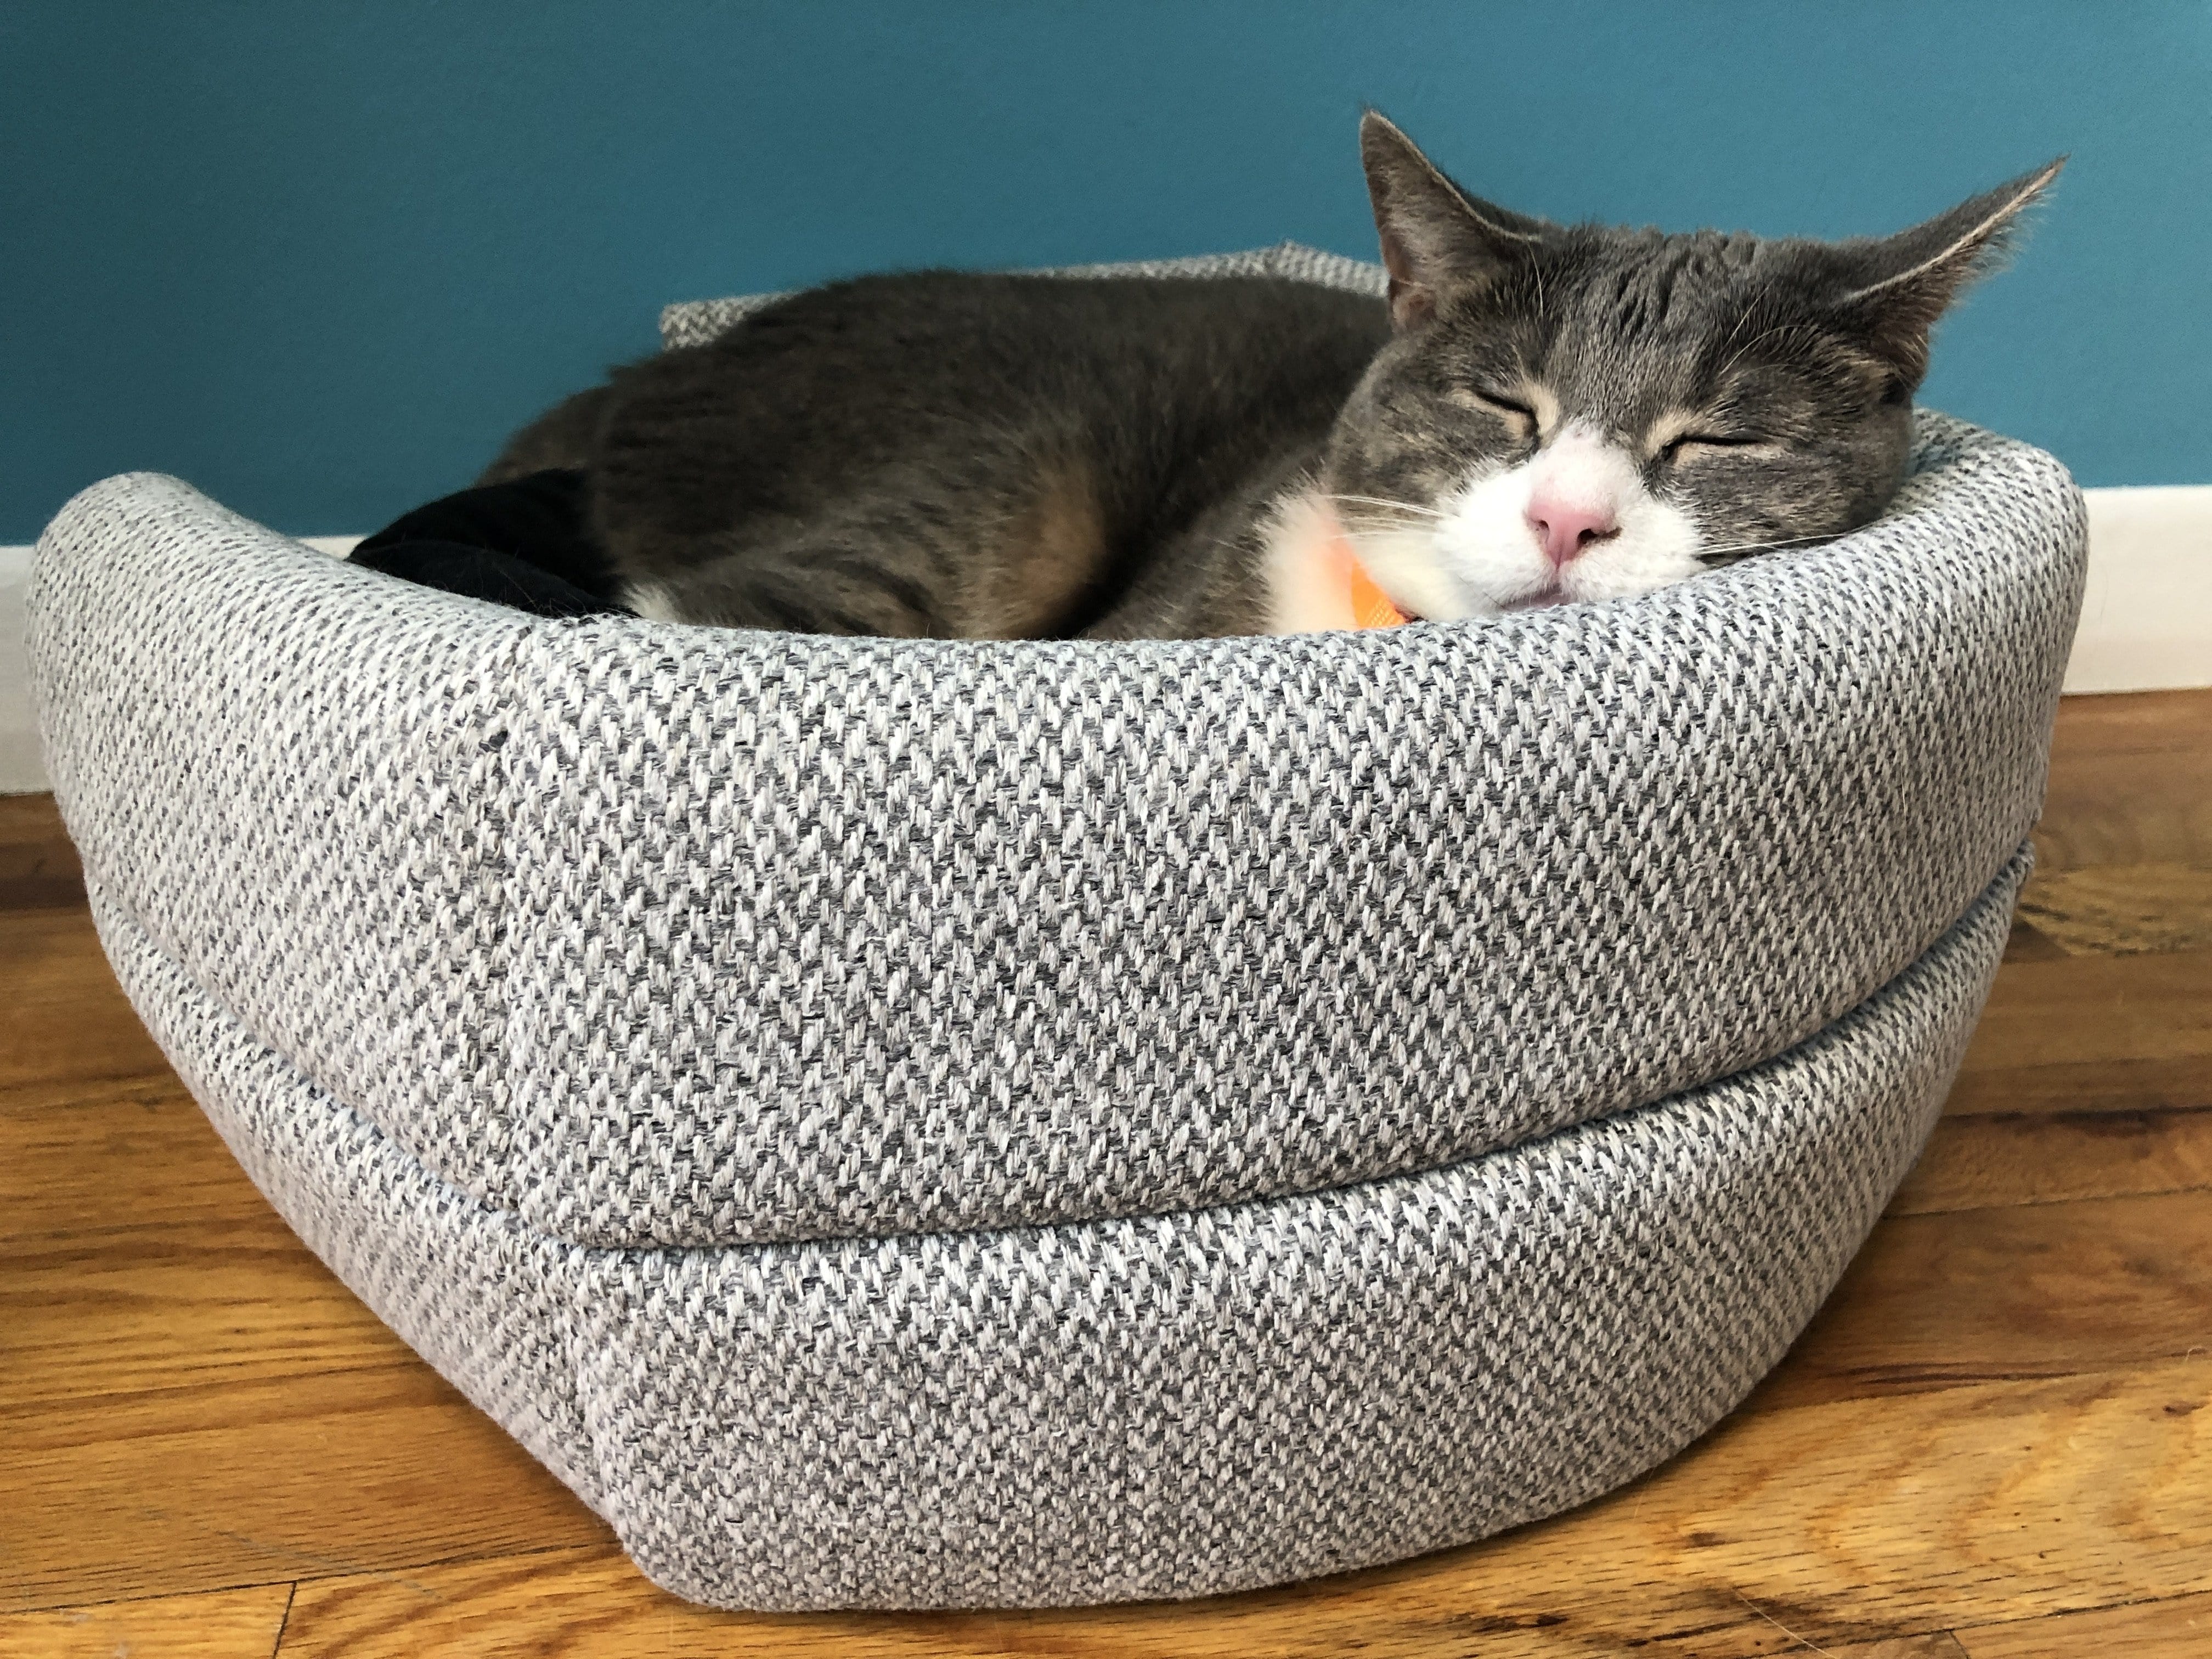 "The Meowbile Home" Convertible Cat Bed & Cave